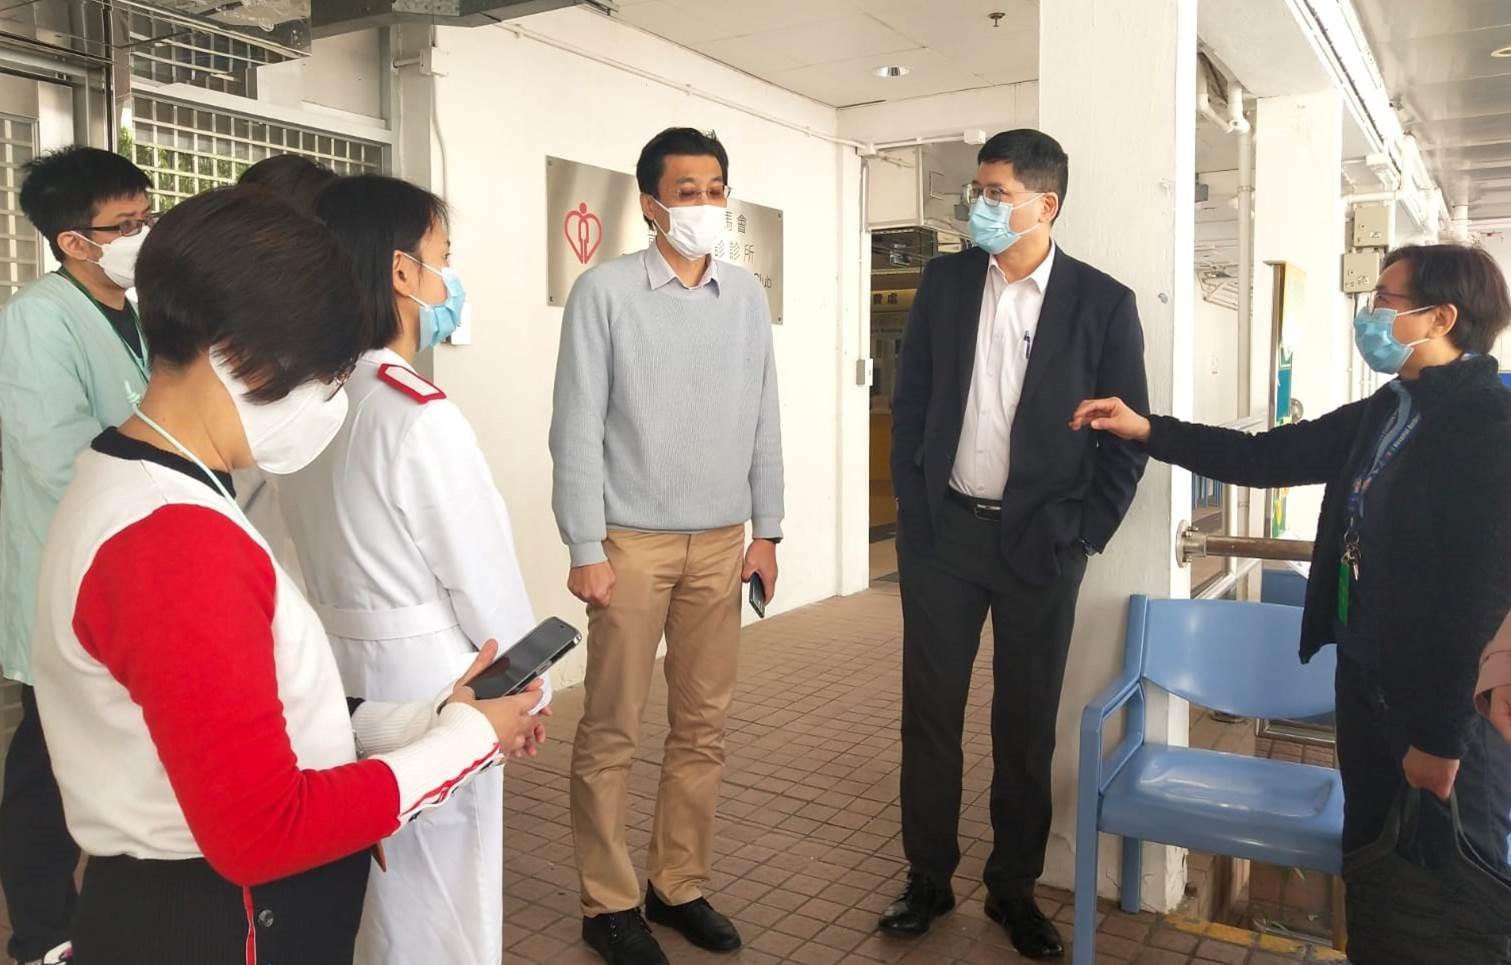 The 71 general out-patient clinics (GOPCs) of the Hospital Authority (HA) have resumed normal service starting from today (January 30). Photo shows the HA Chief Executive, Dr Tony Ko (second right), visited the South Kwai Chung Jockey Club GOPC today to learn about its operation.